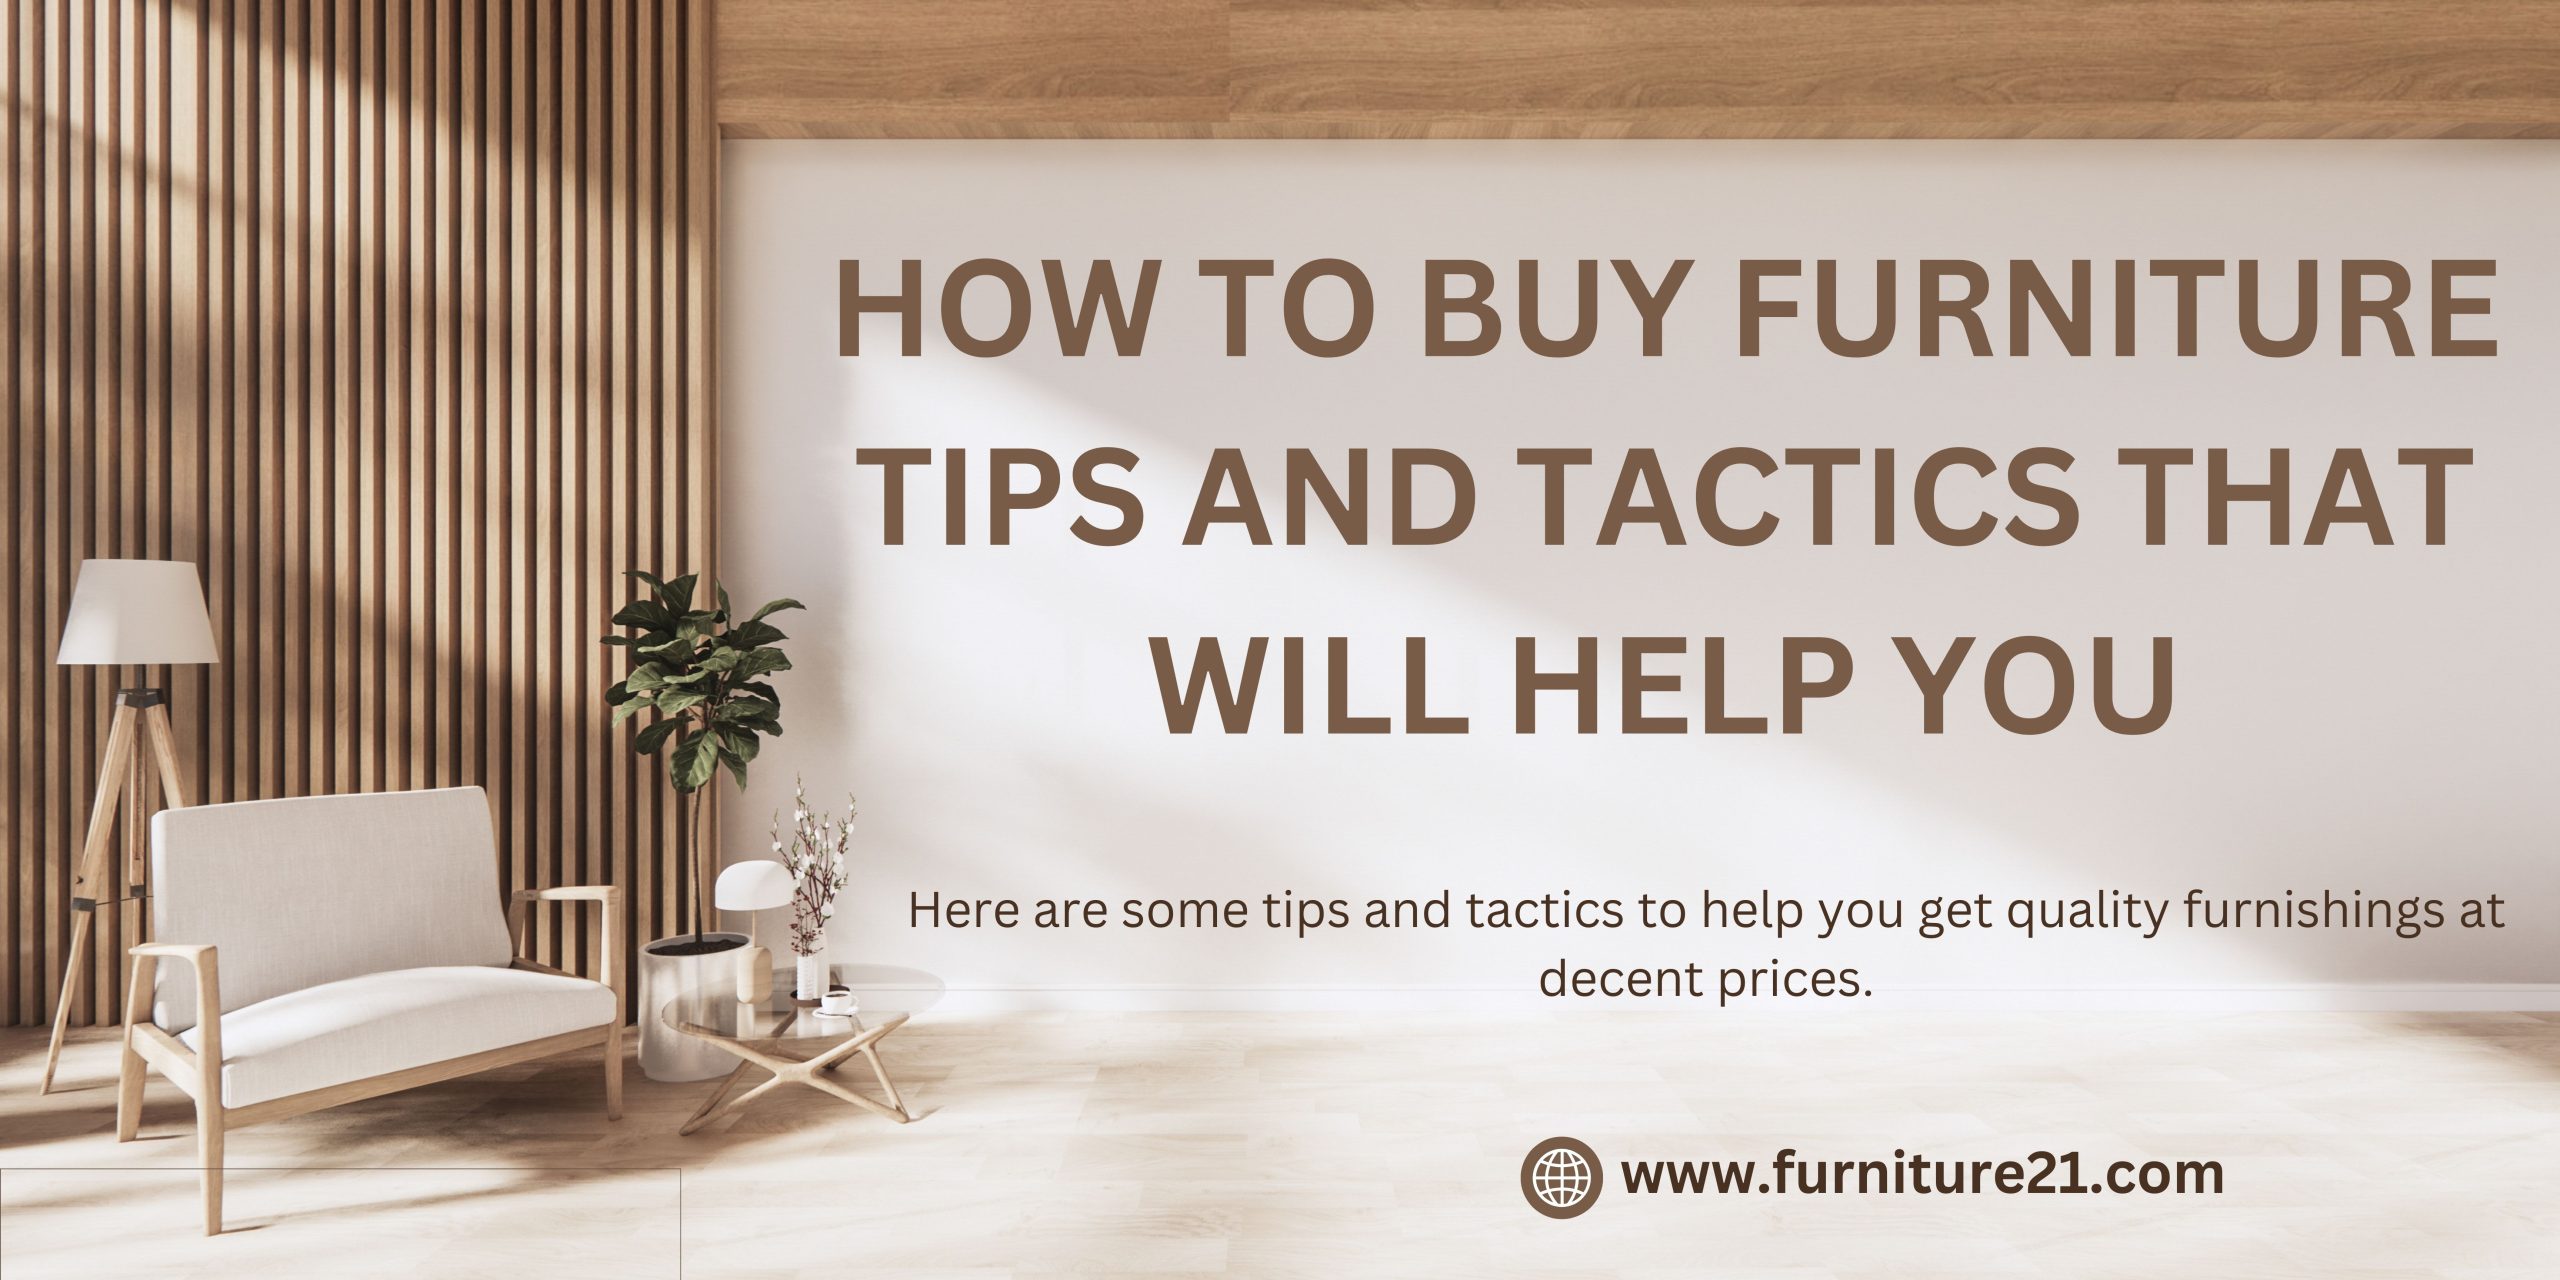 How to Buy Furniture Tips and Tactics That Will Help You